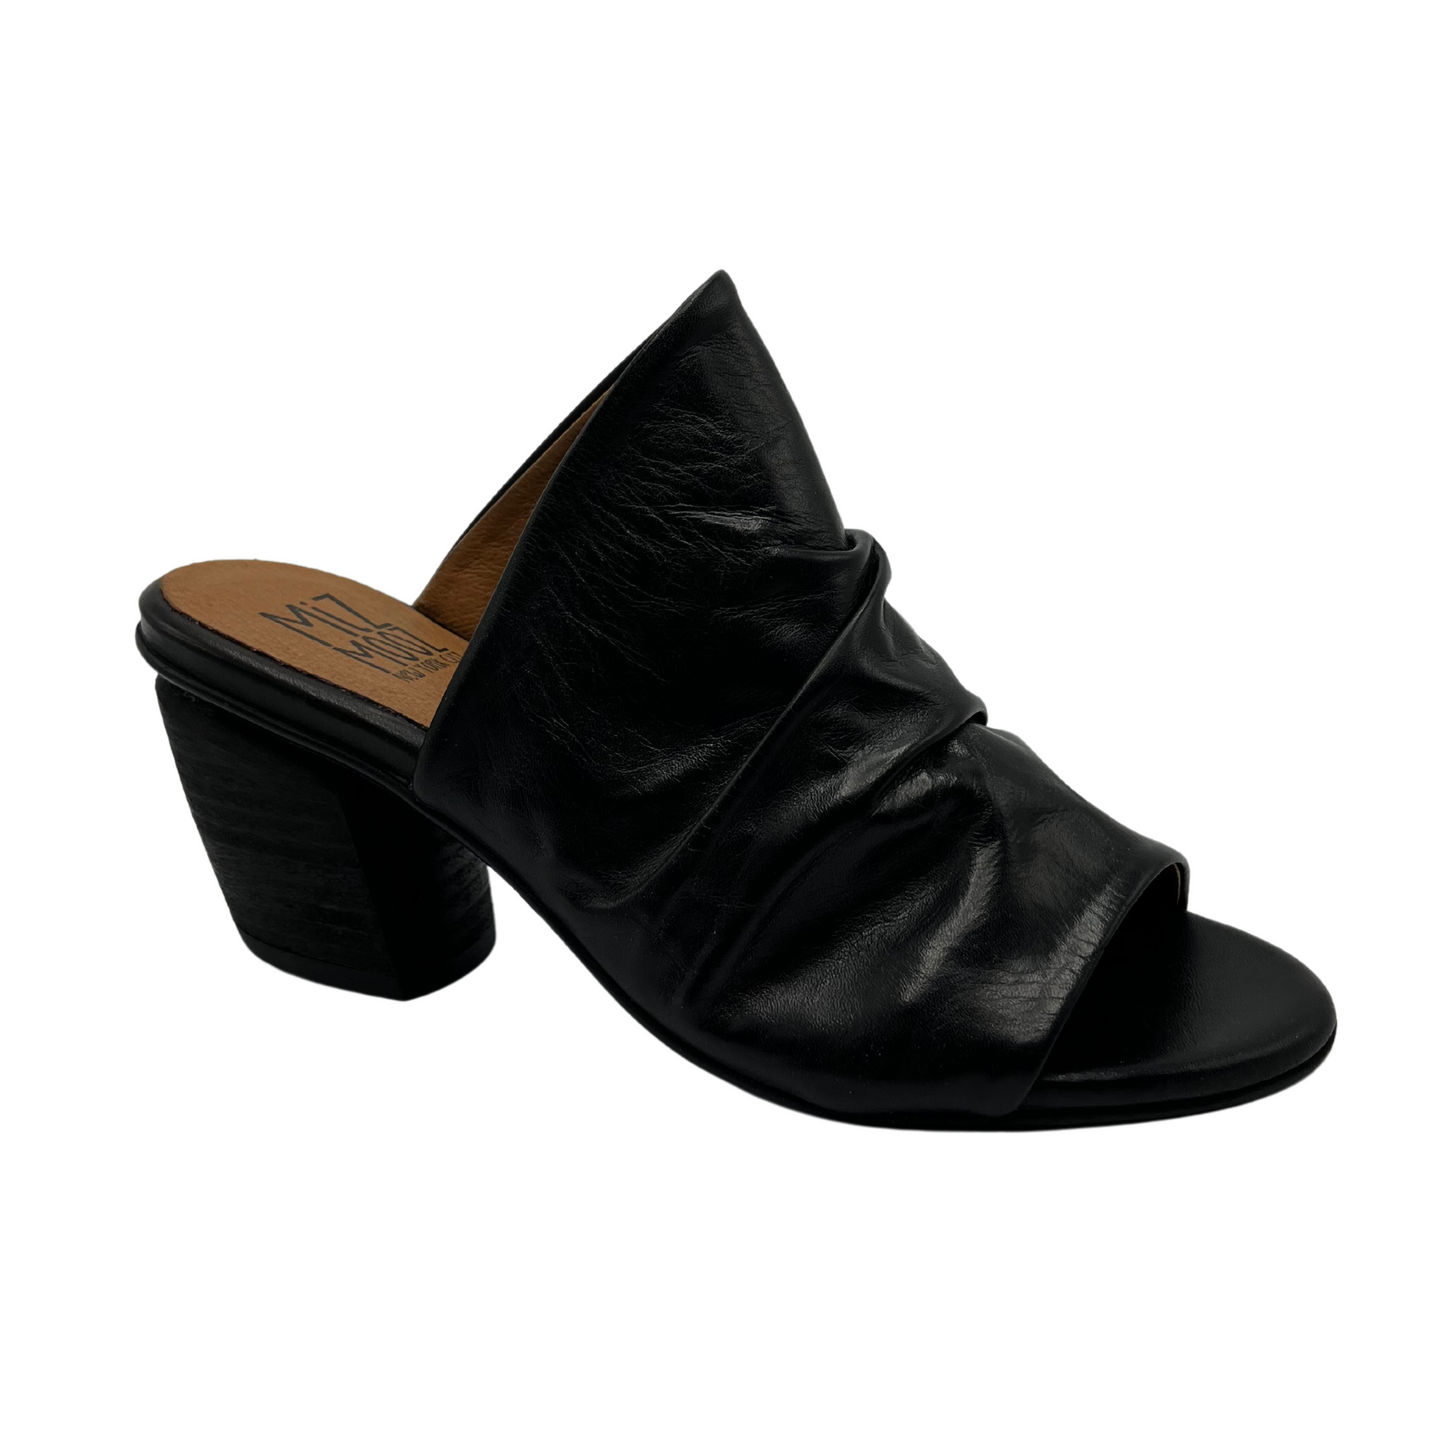 45 degree angled view of slouchy leather sandal in black. With a muled heel and open toe.